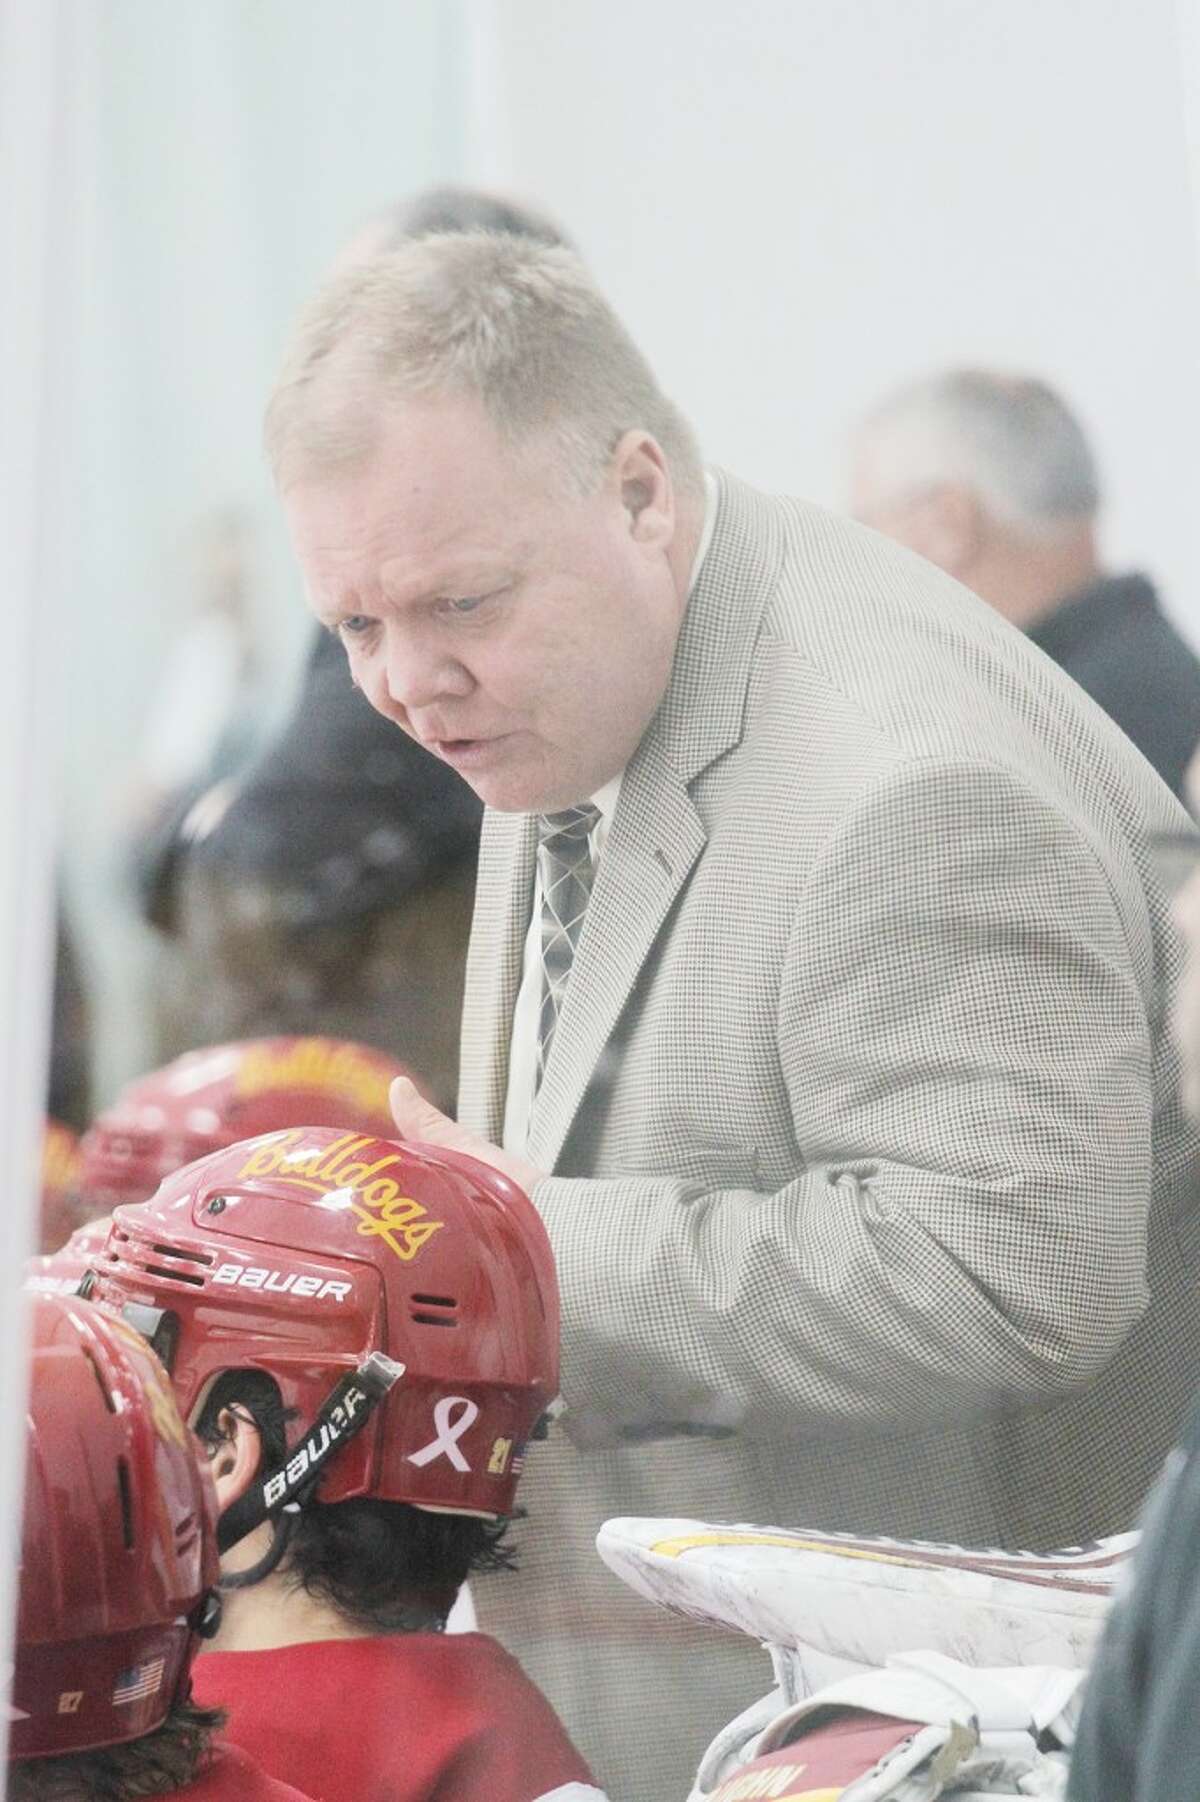 HONORED: Ferris State University hockey coach Bob Daniels guides his players through a game against Ohio State University this weekend. Daniels received a Northern Lights award after Saturday's game. (Pioneer photo/Marty Slagter)